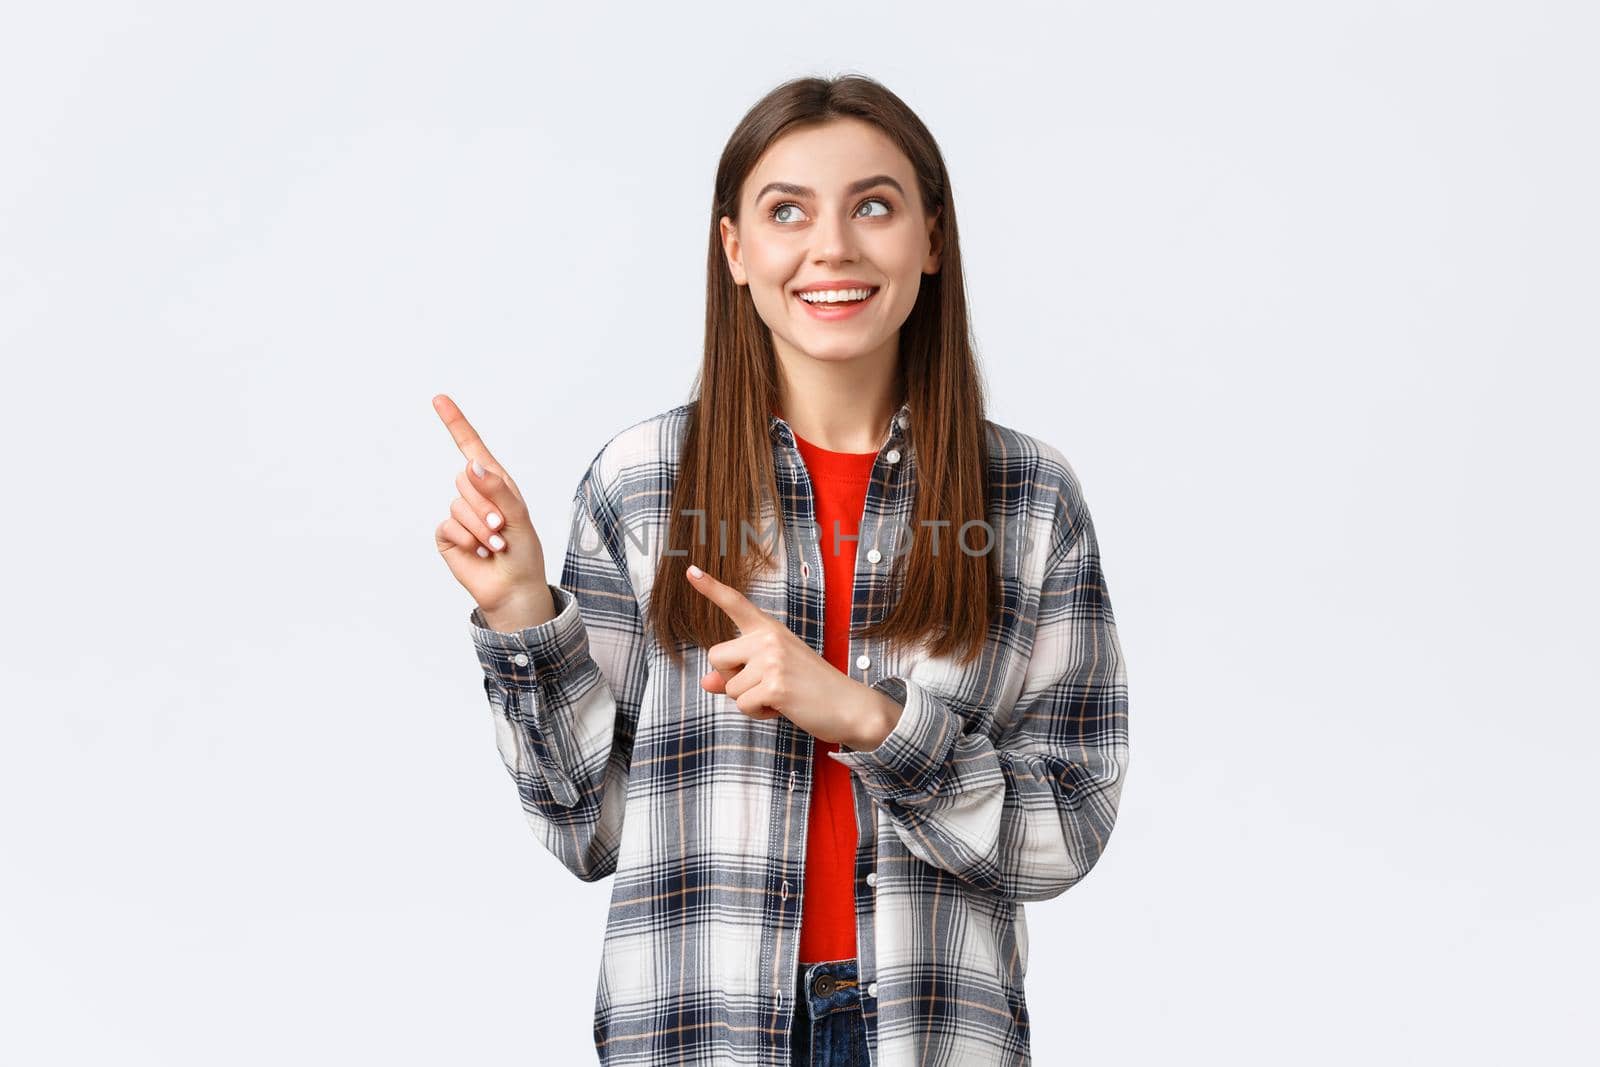 Lifestyle, different emotions, leisure activities concept. Dreamy cute smiling woman in checked shirt, pointing and looking upper left corner at best variant, picked or booked smth online.